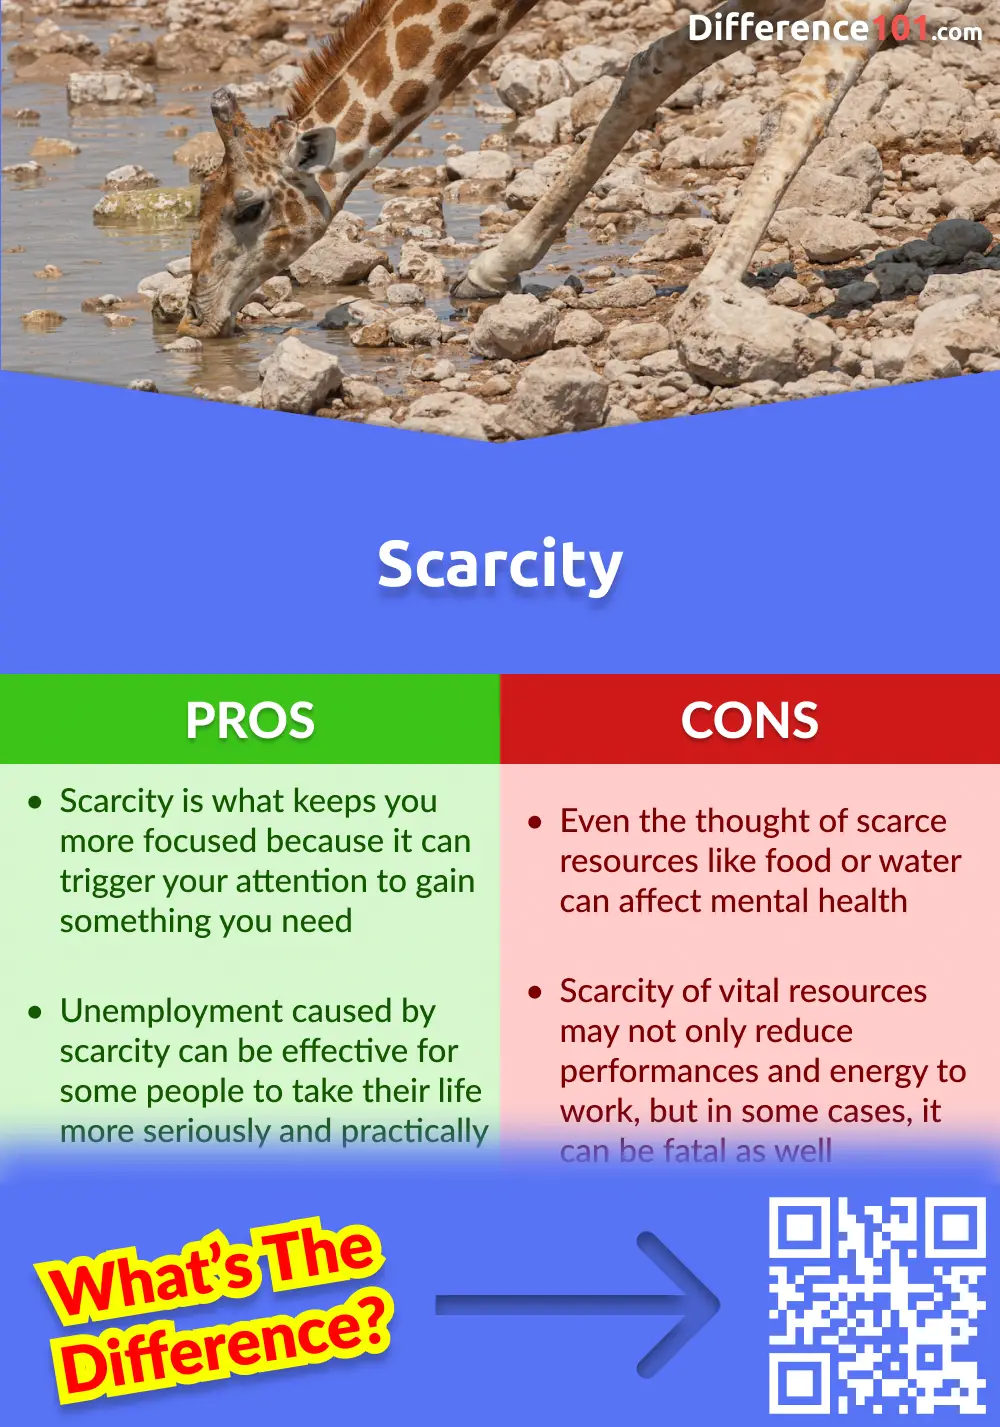 Scarcity Pros and Cons
